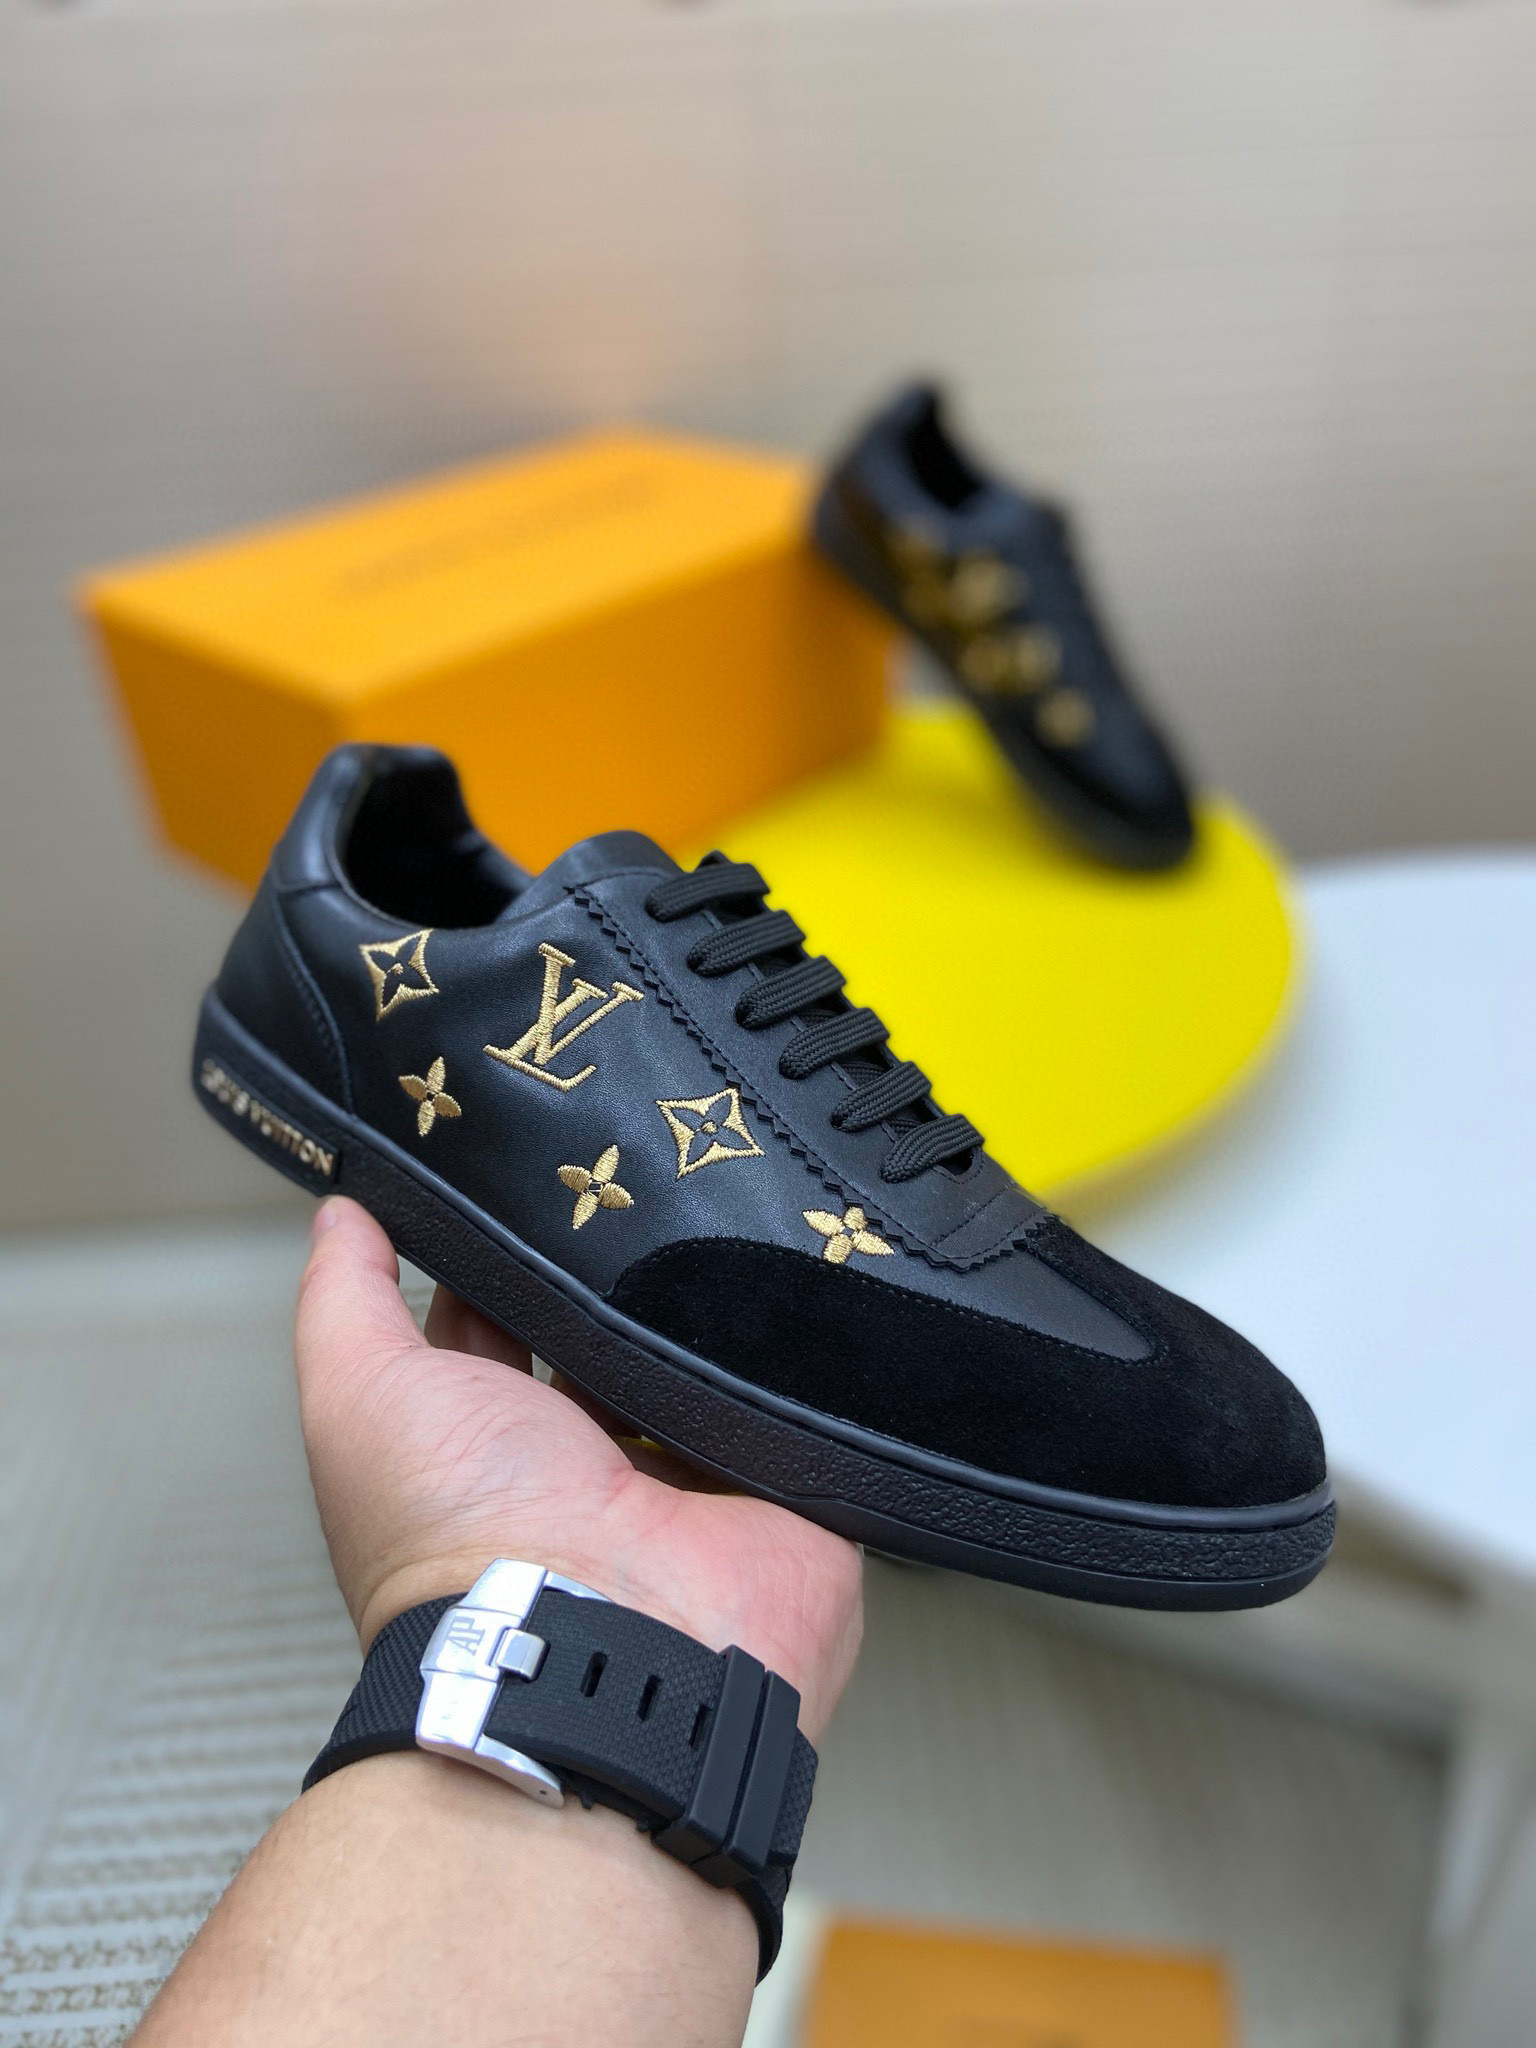 Louis Vuitton Monogram Embroidered Lace Up Sneaker For Men  # 274434, cheap LV Leisure Shoes For Men, only $85!